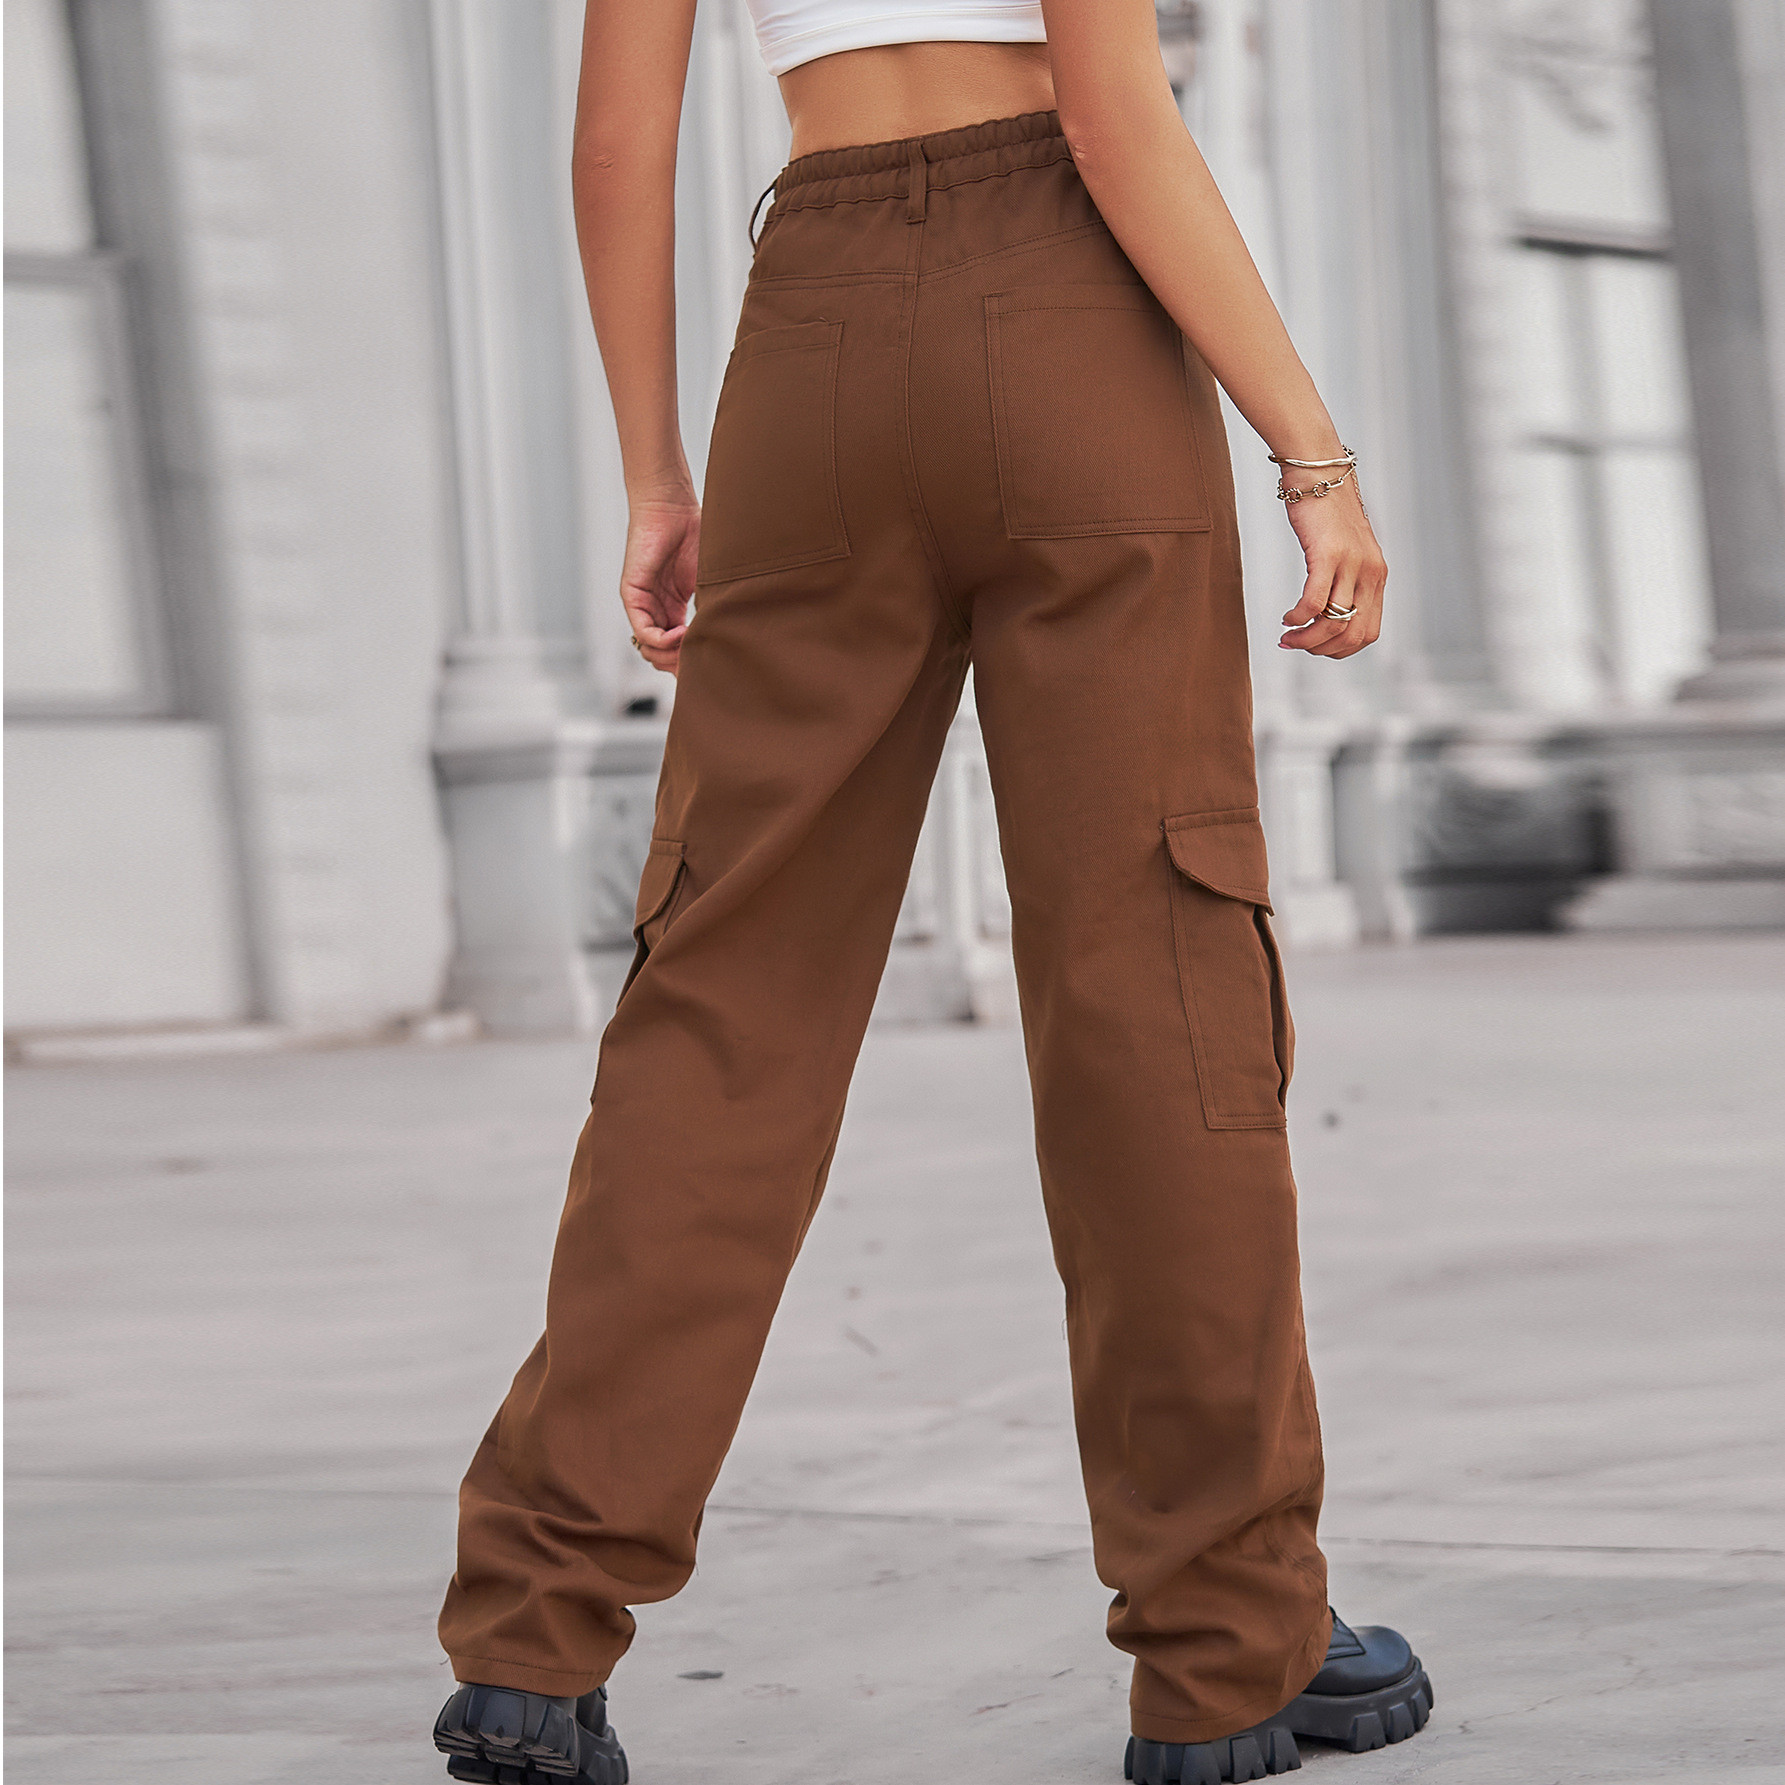 SF Jeans by Pantaloons Brown Cotton High Rise Cargo Pants